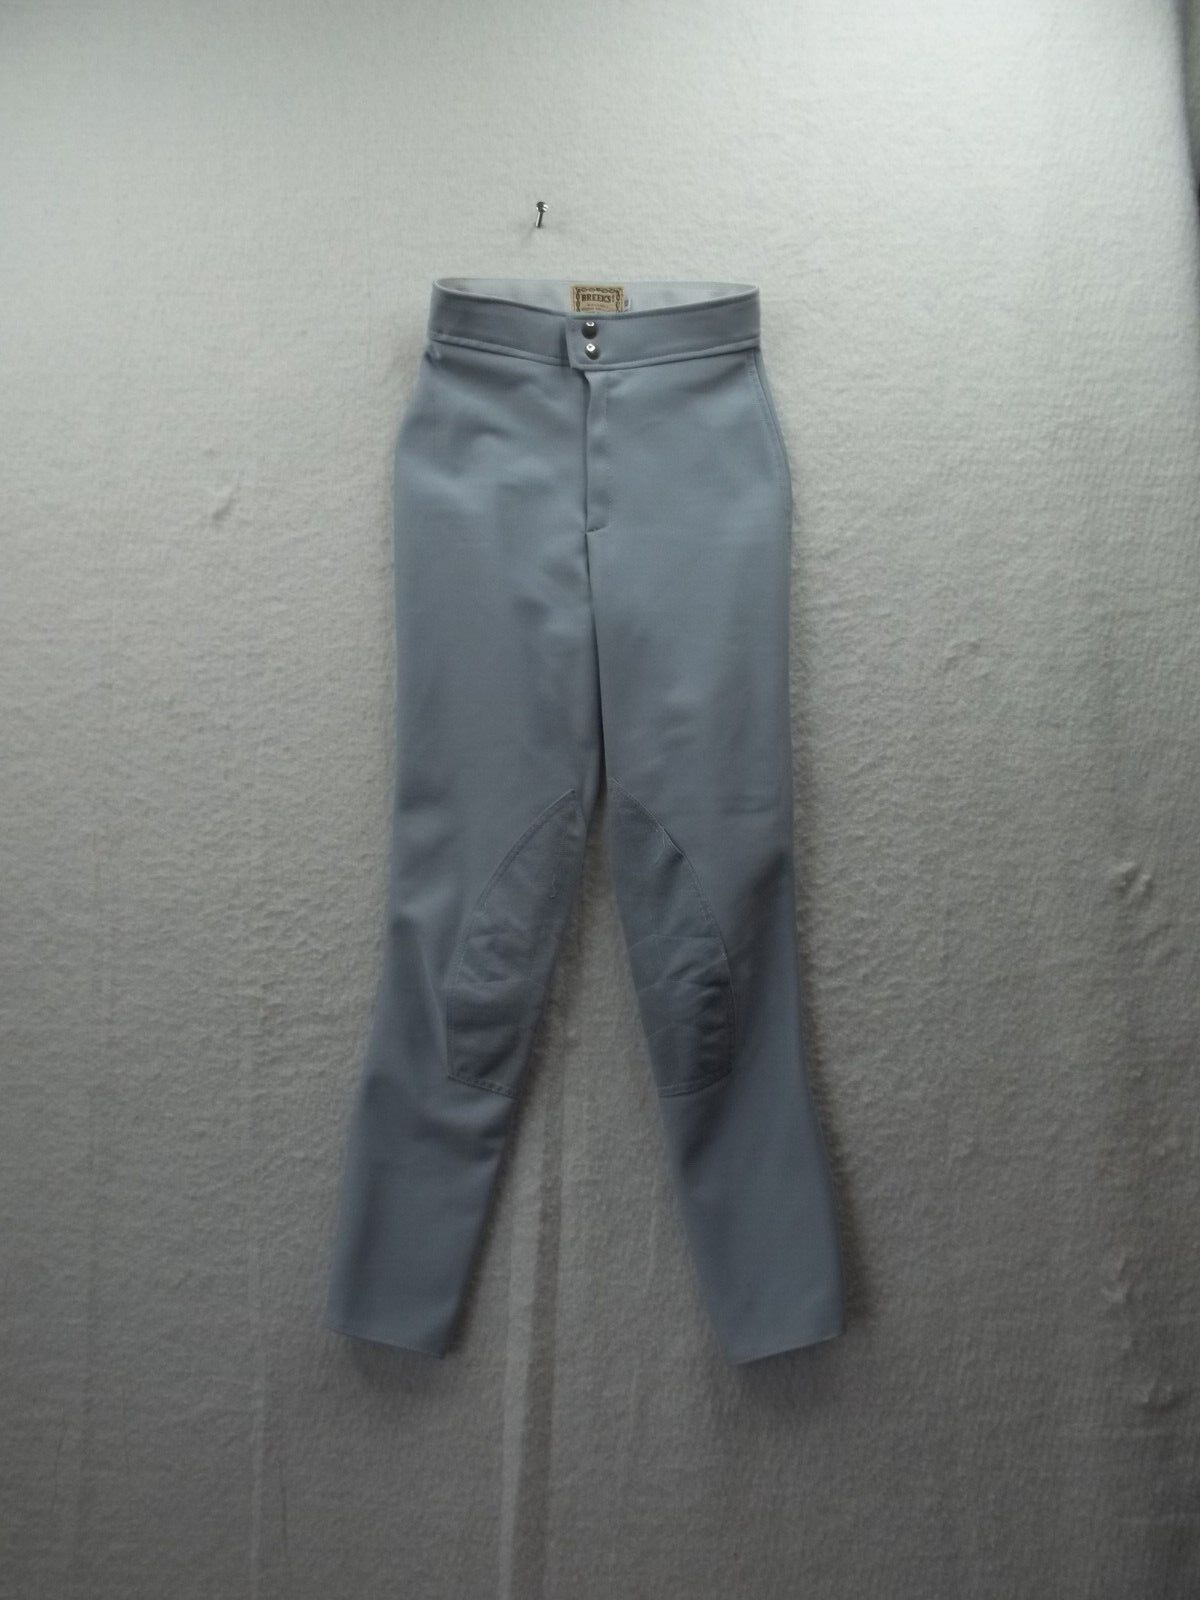 Vintage Breeks Horse Riding Breeches Pants Youth XS Gray USA Kids Equestrian